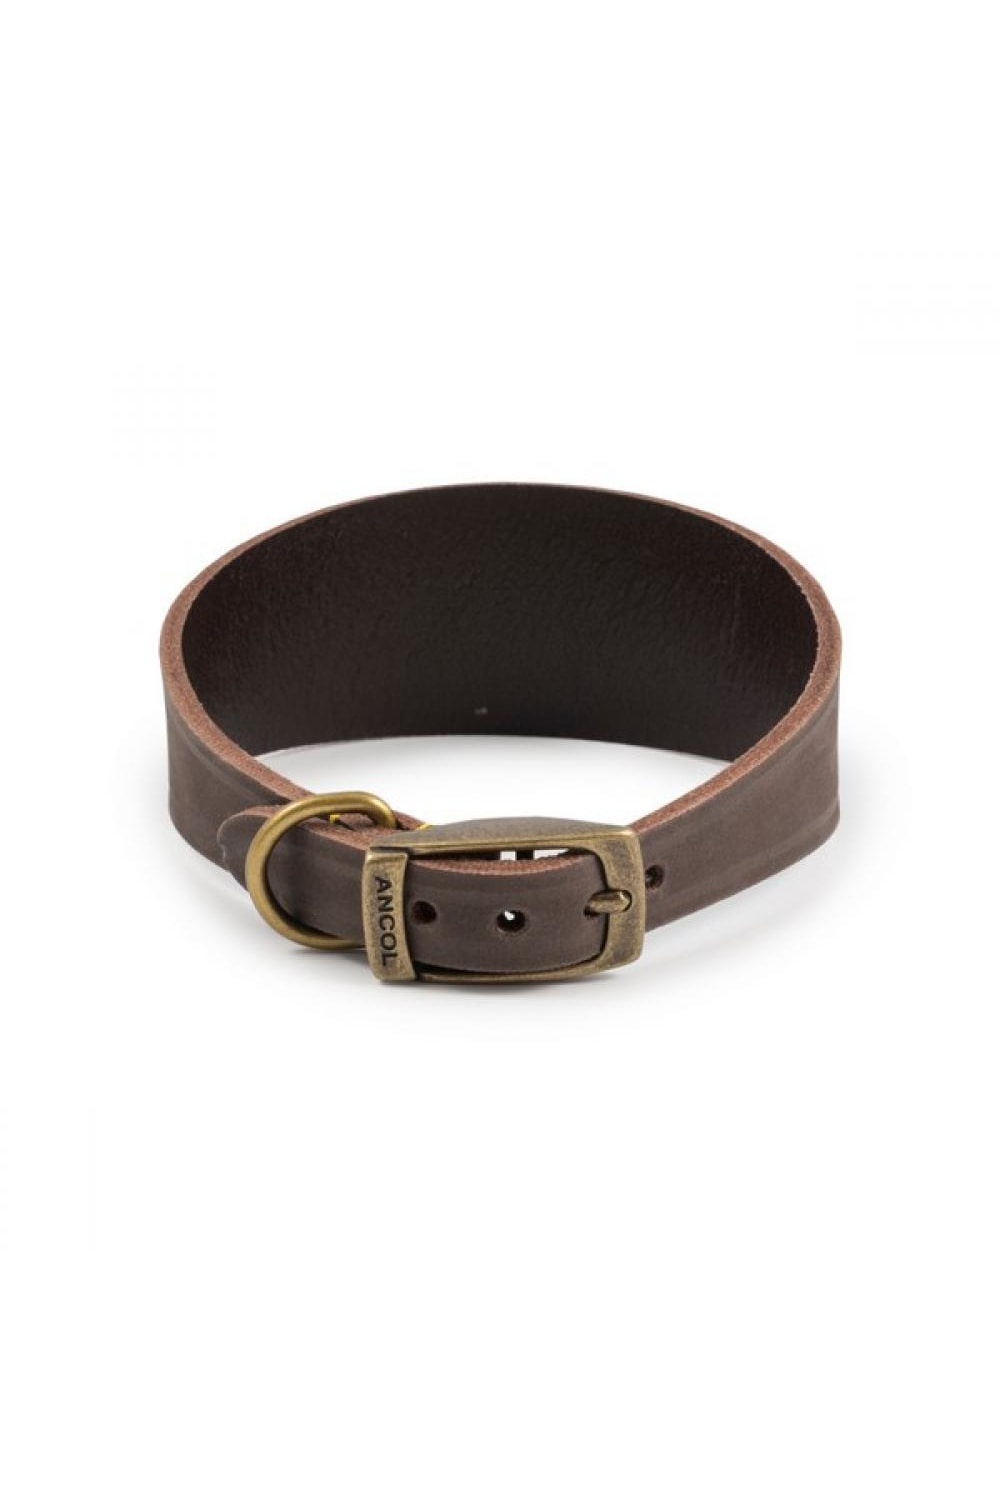 Ancol Timberwolf Leather Whippet Collar (Sable) (11.8-13.4in)